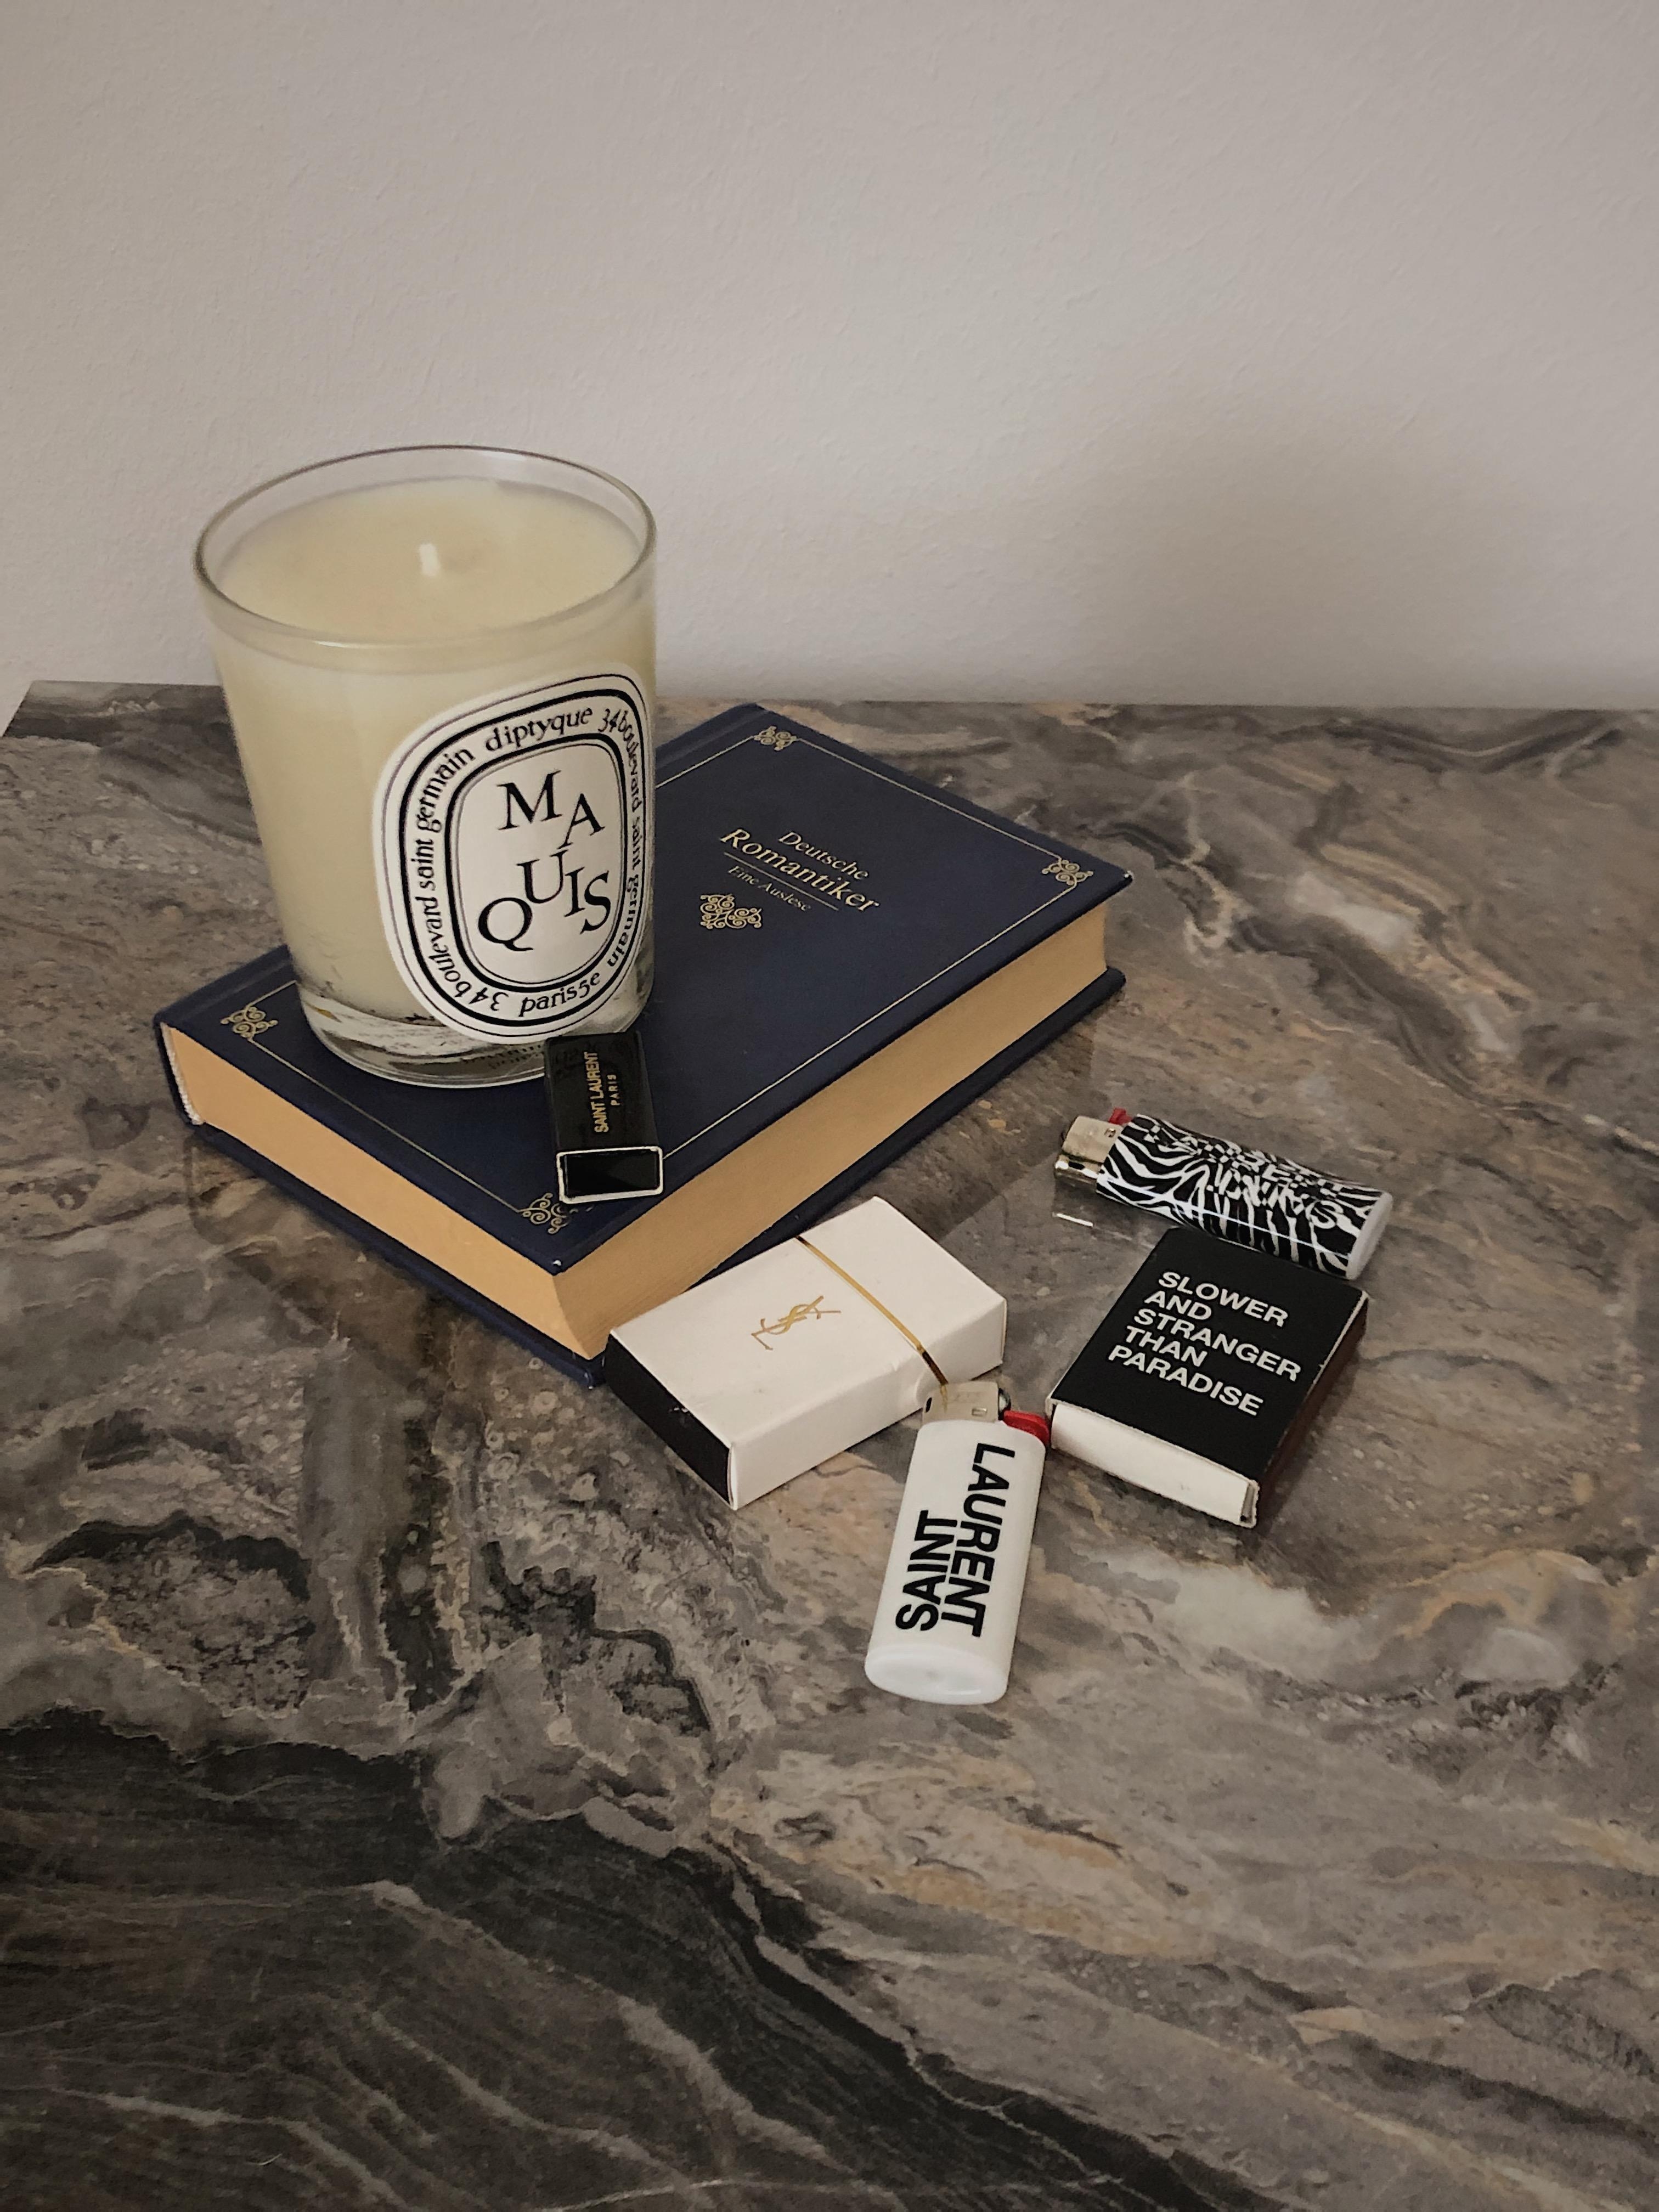 Slower and stranger than paradise 💫
#paradise #home #decor #interior #streichhölzer #candle #marmortisch #marble